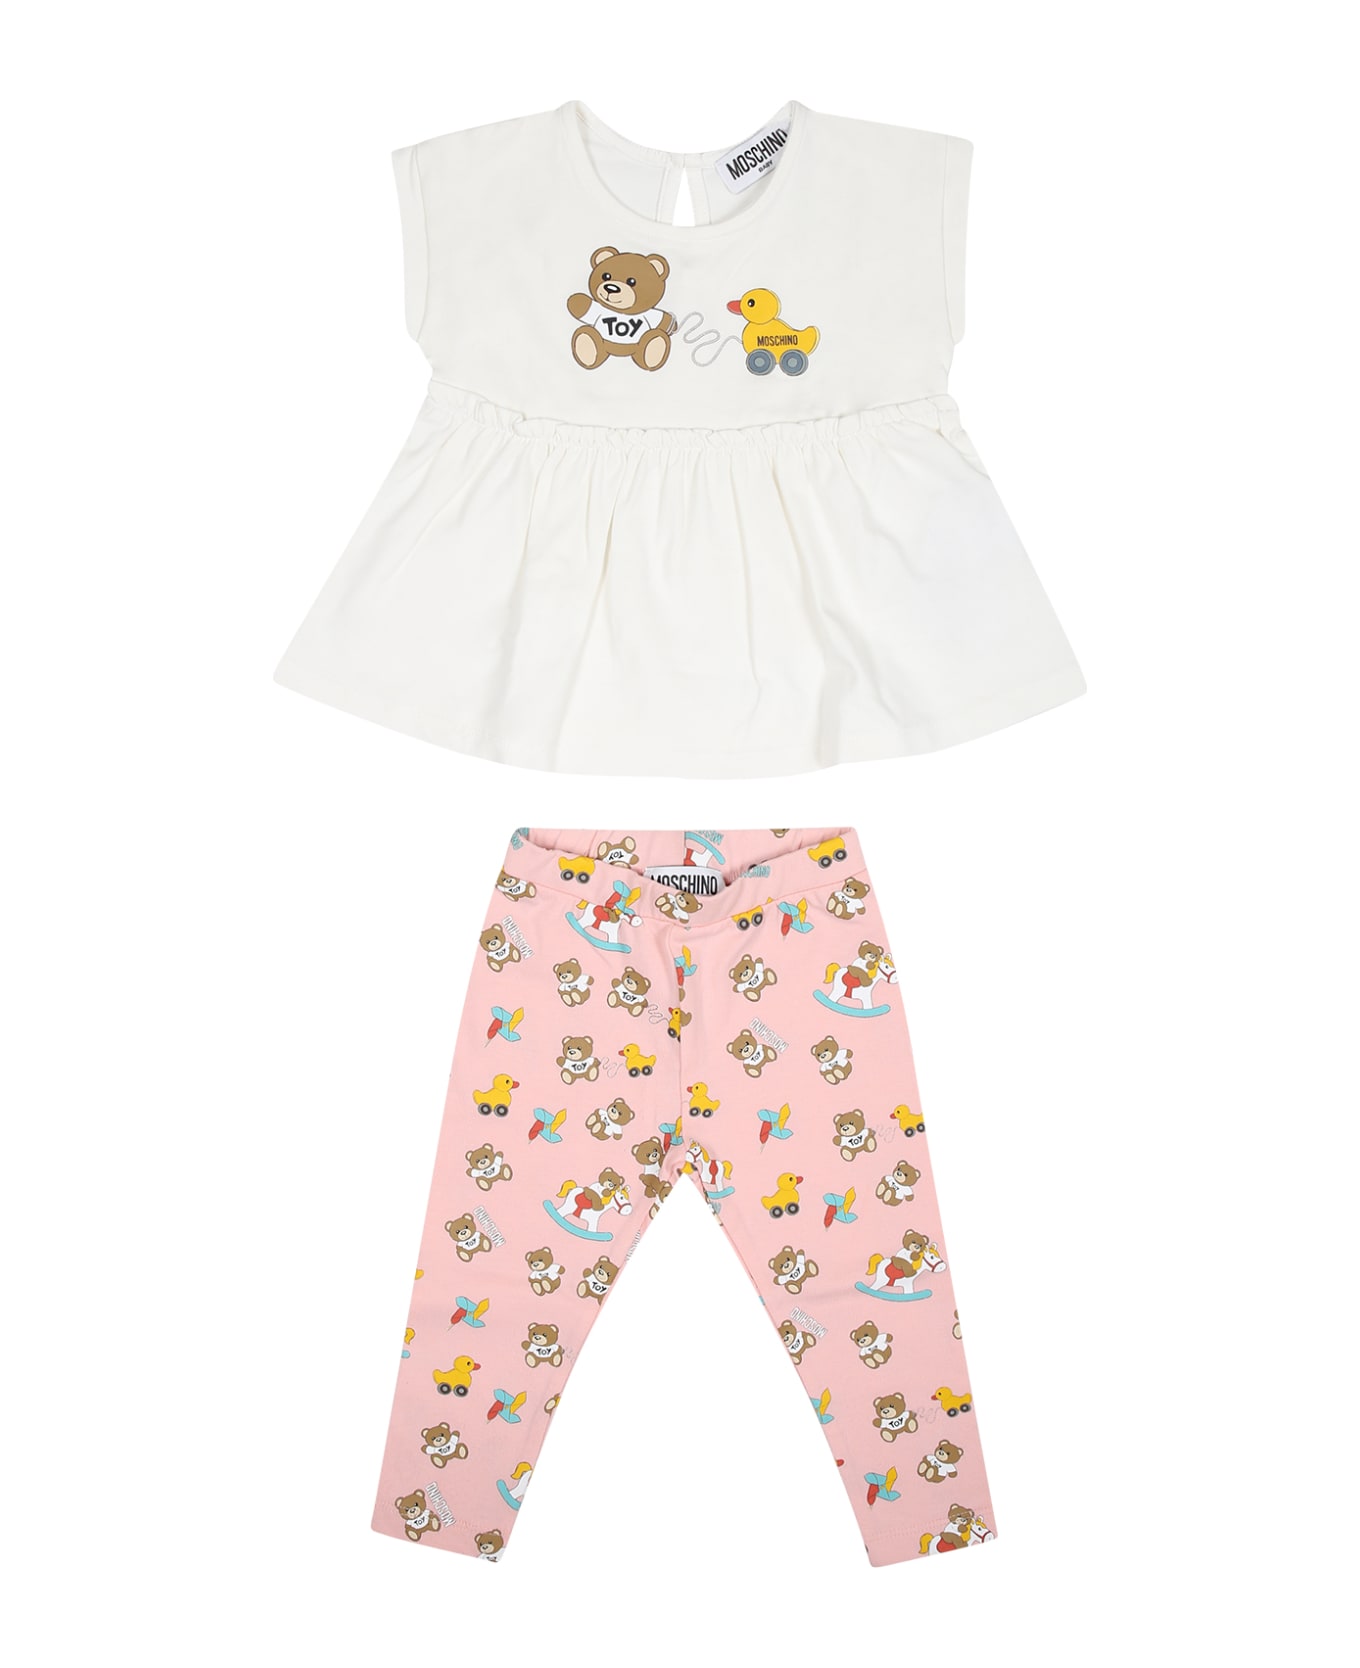 Moschino Multicolor Set For Baby Girl With Teddy Bear And Ducks - Multicolor